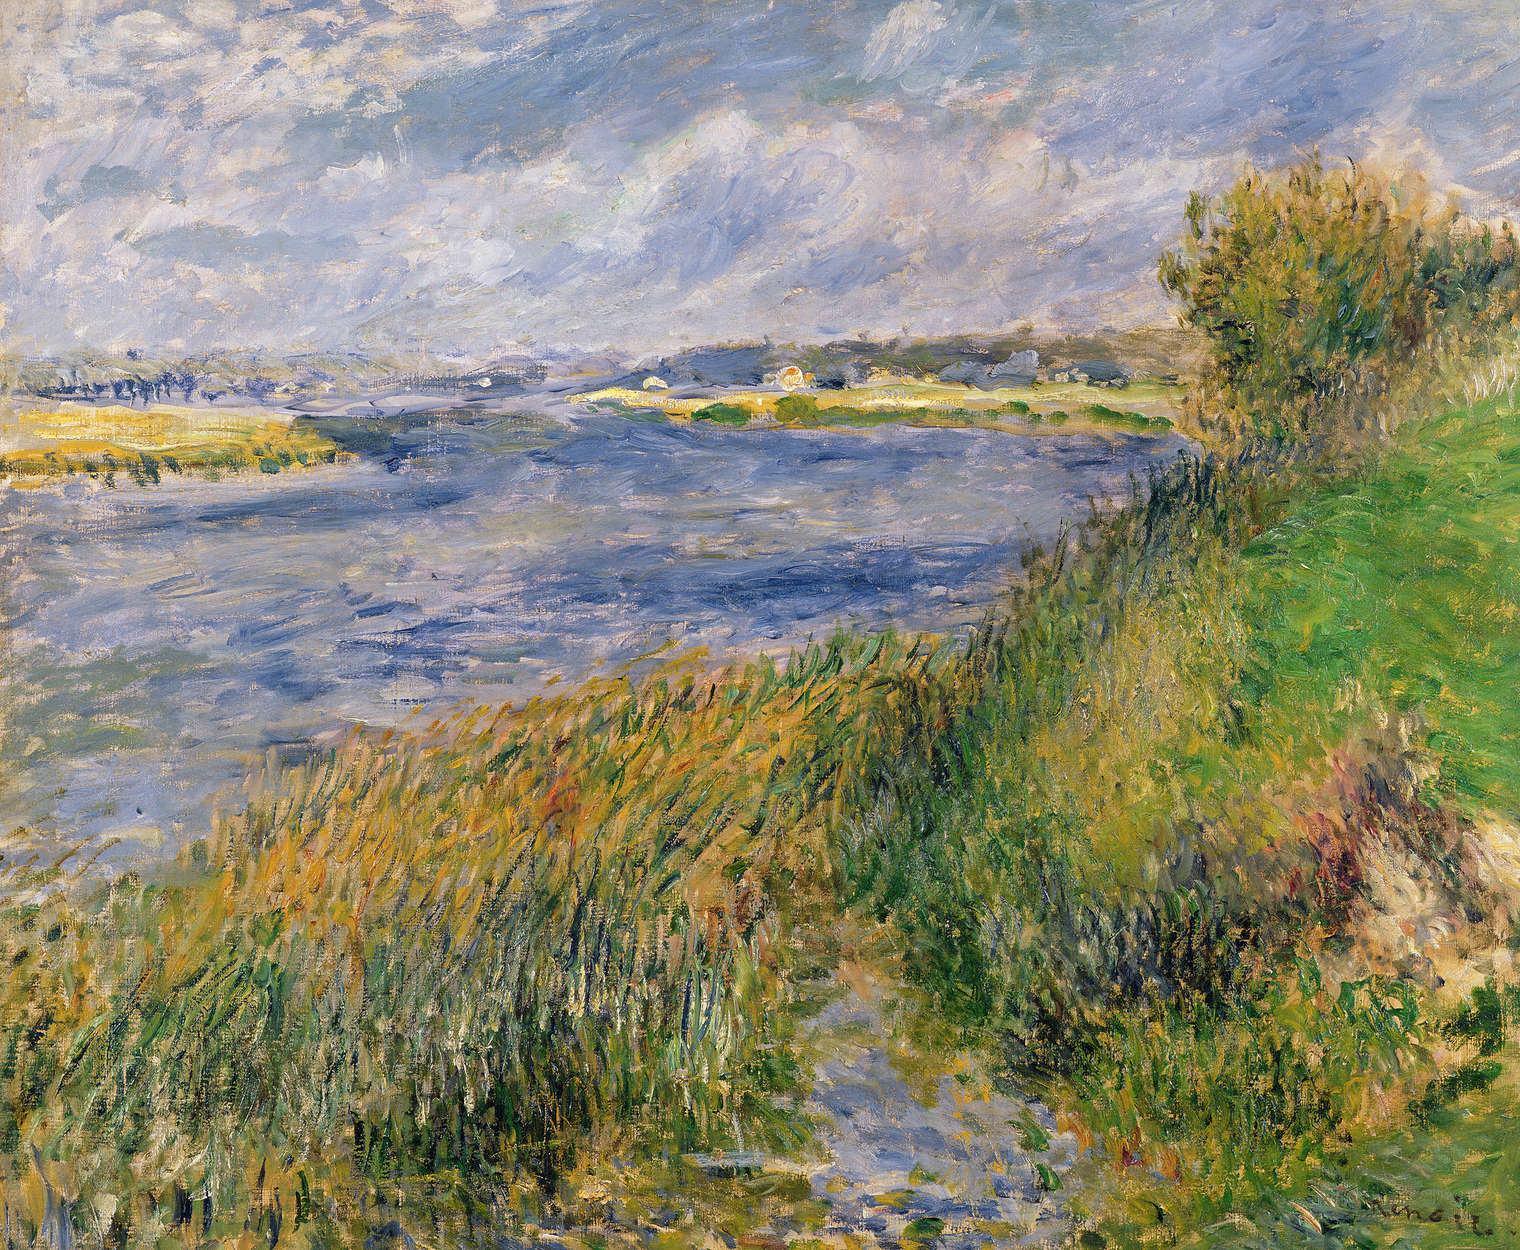             Photo wallpaper "The banks of the Seine in Champrosay" by Pierre Auguste Renoir
        